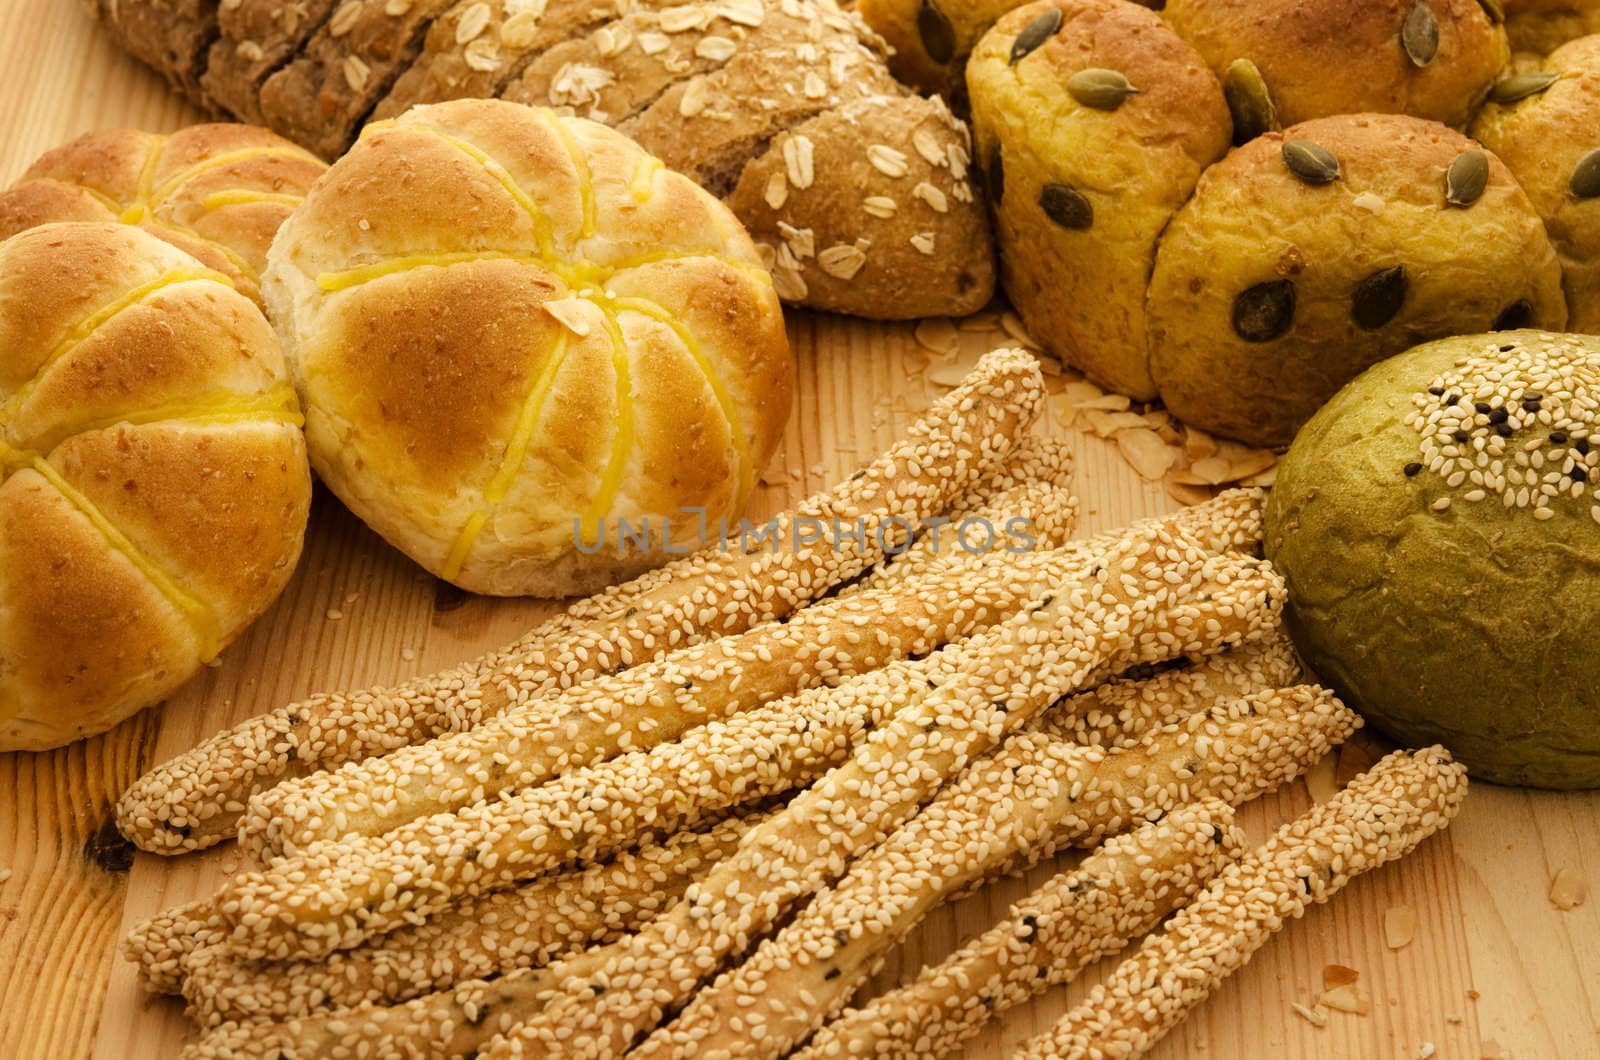 Variety of Organic Breads on plank background